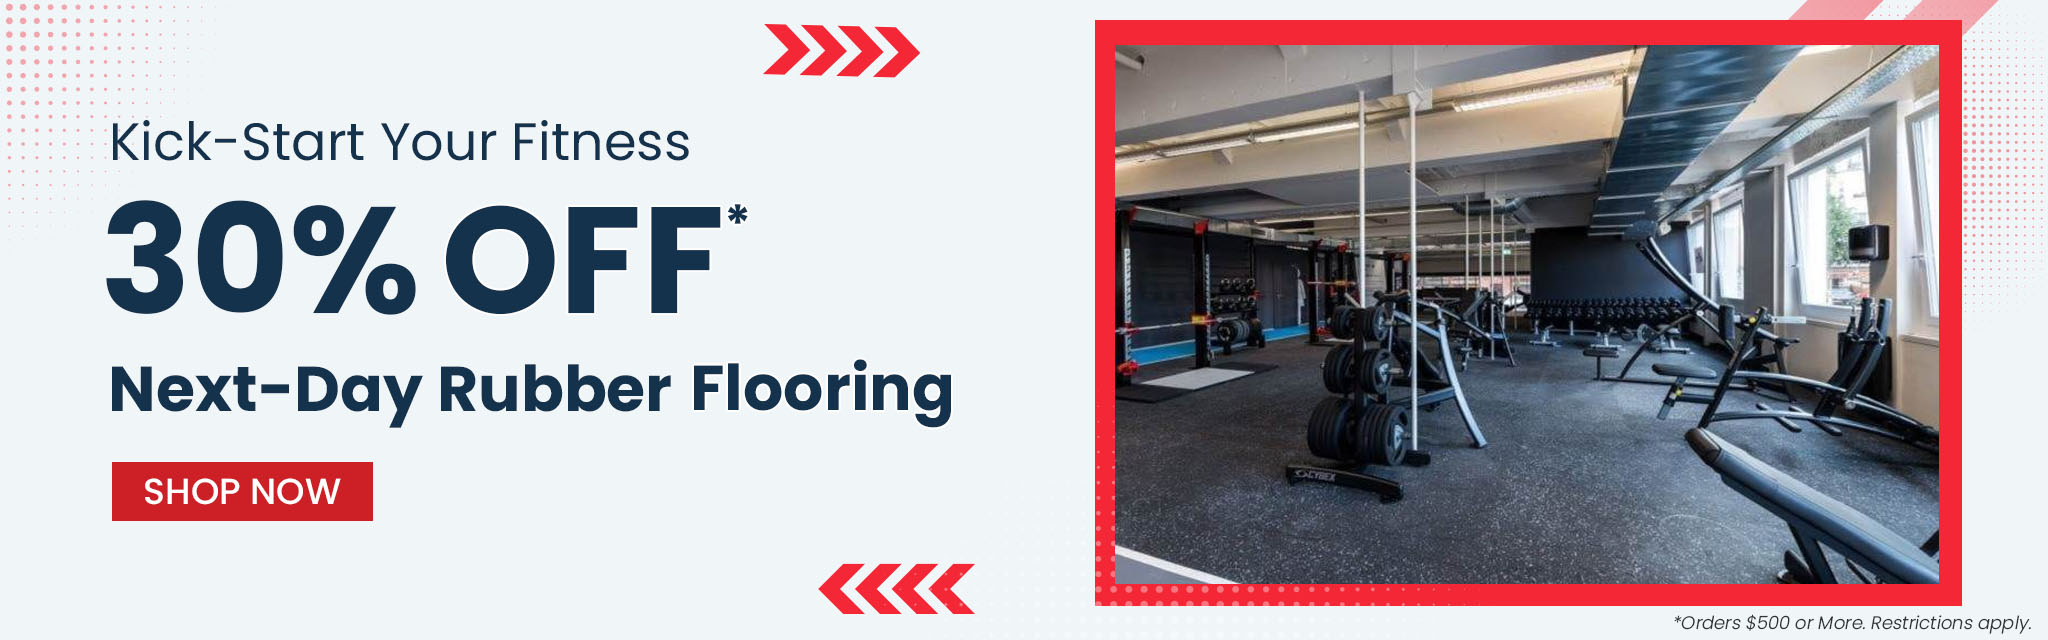 Kick-Start your Fitness. 30% Off Next-Day Rubber Flooring. Shop Now. Order $500 or More. Restrictions apply